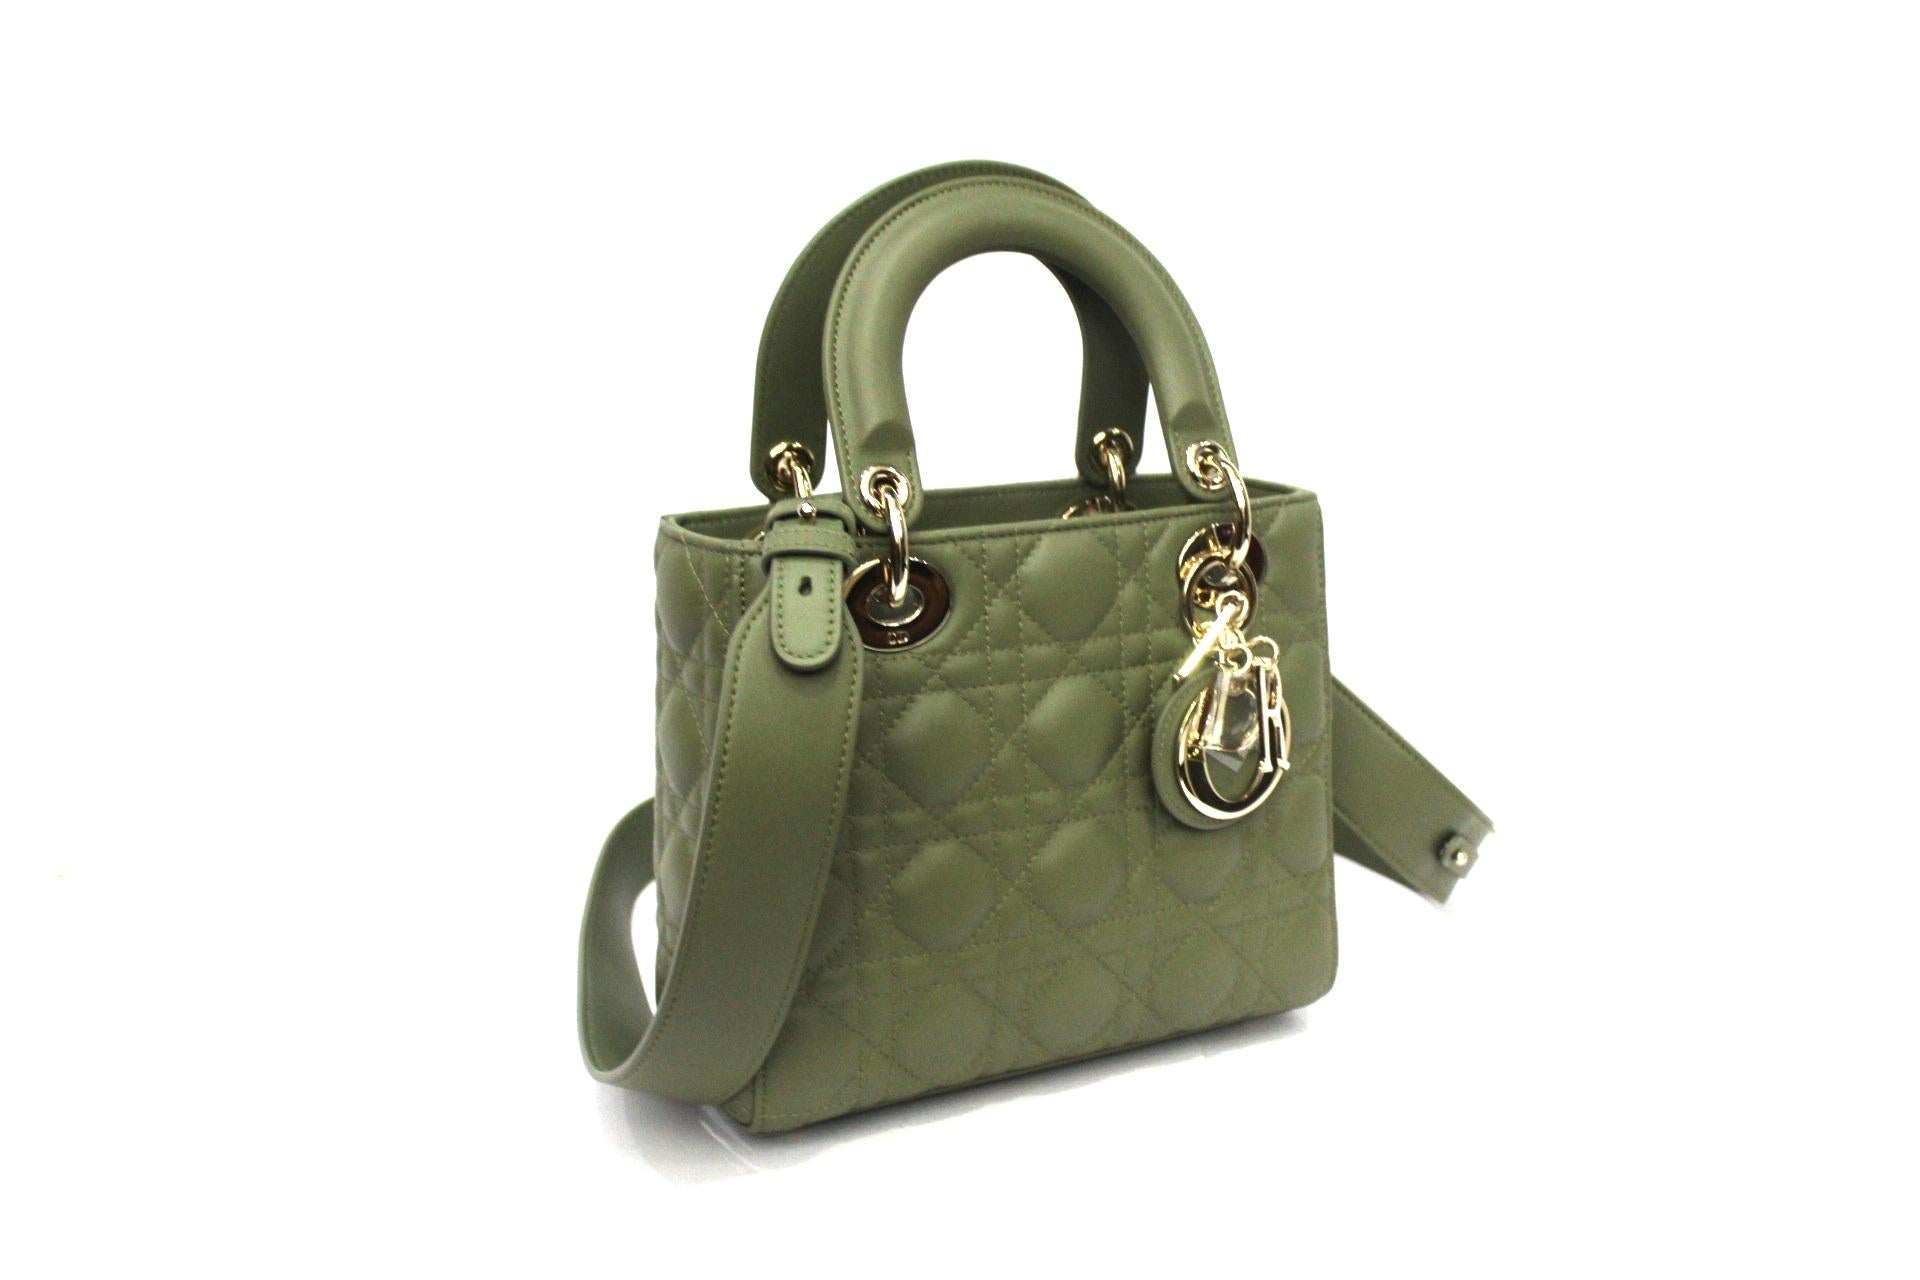 Dior Lady model bag made of green leather with silver hardware.
Equipped with top handle and removable shoulder strap. Internally capacious for the essentials. Like new condition.